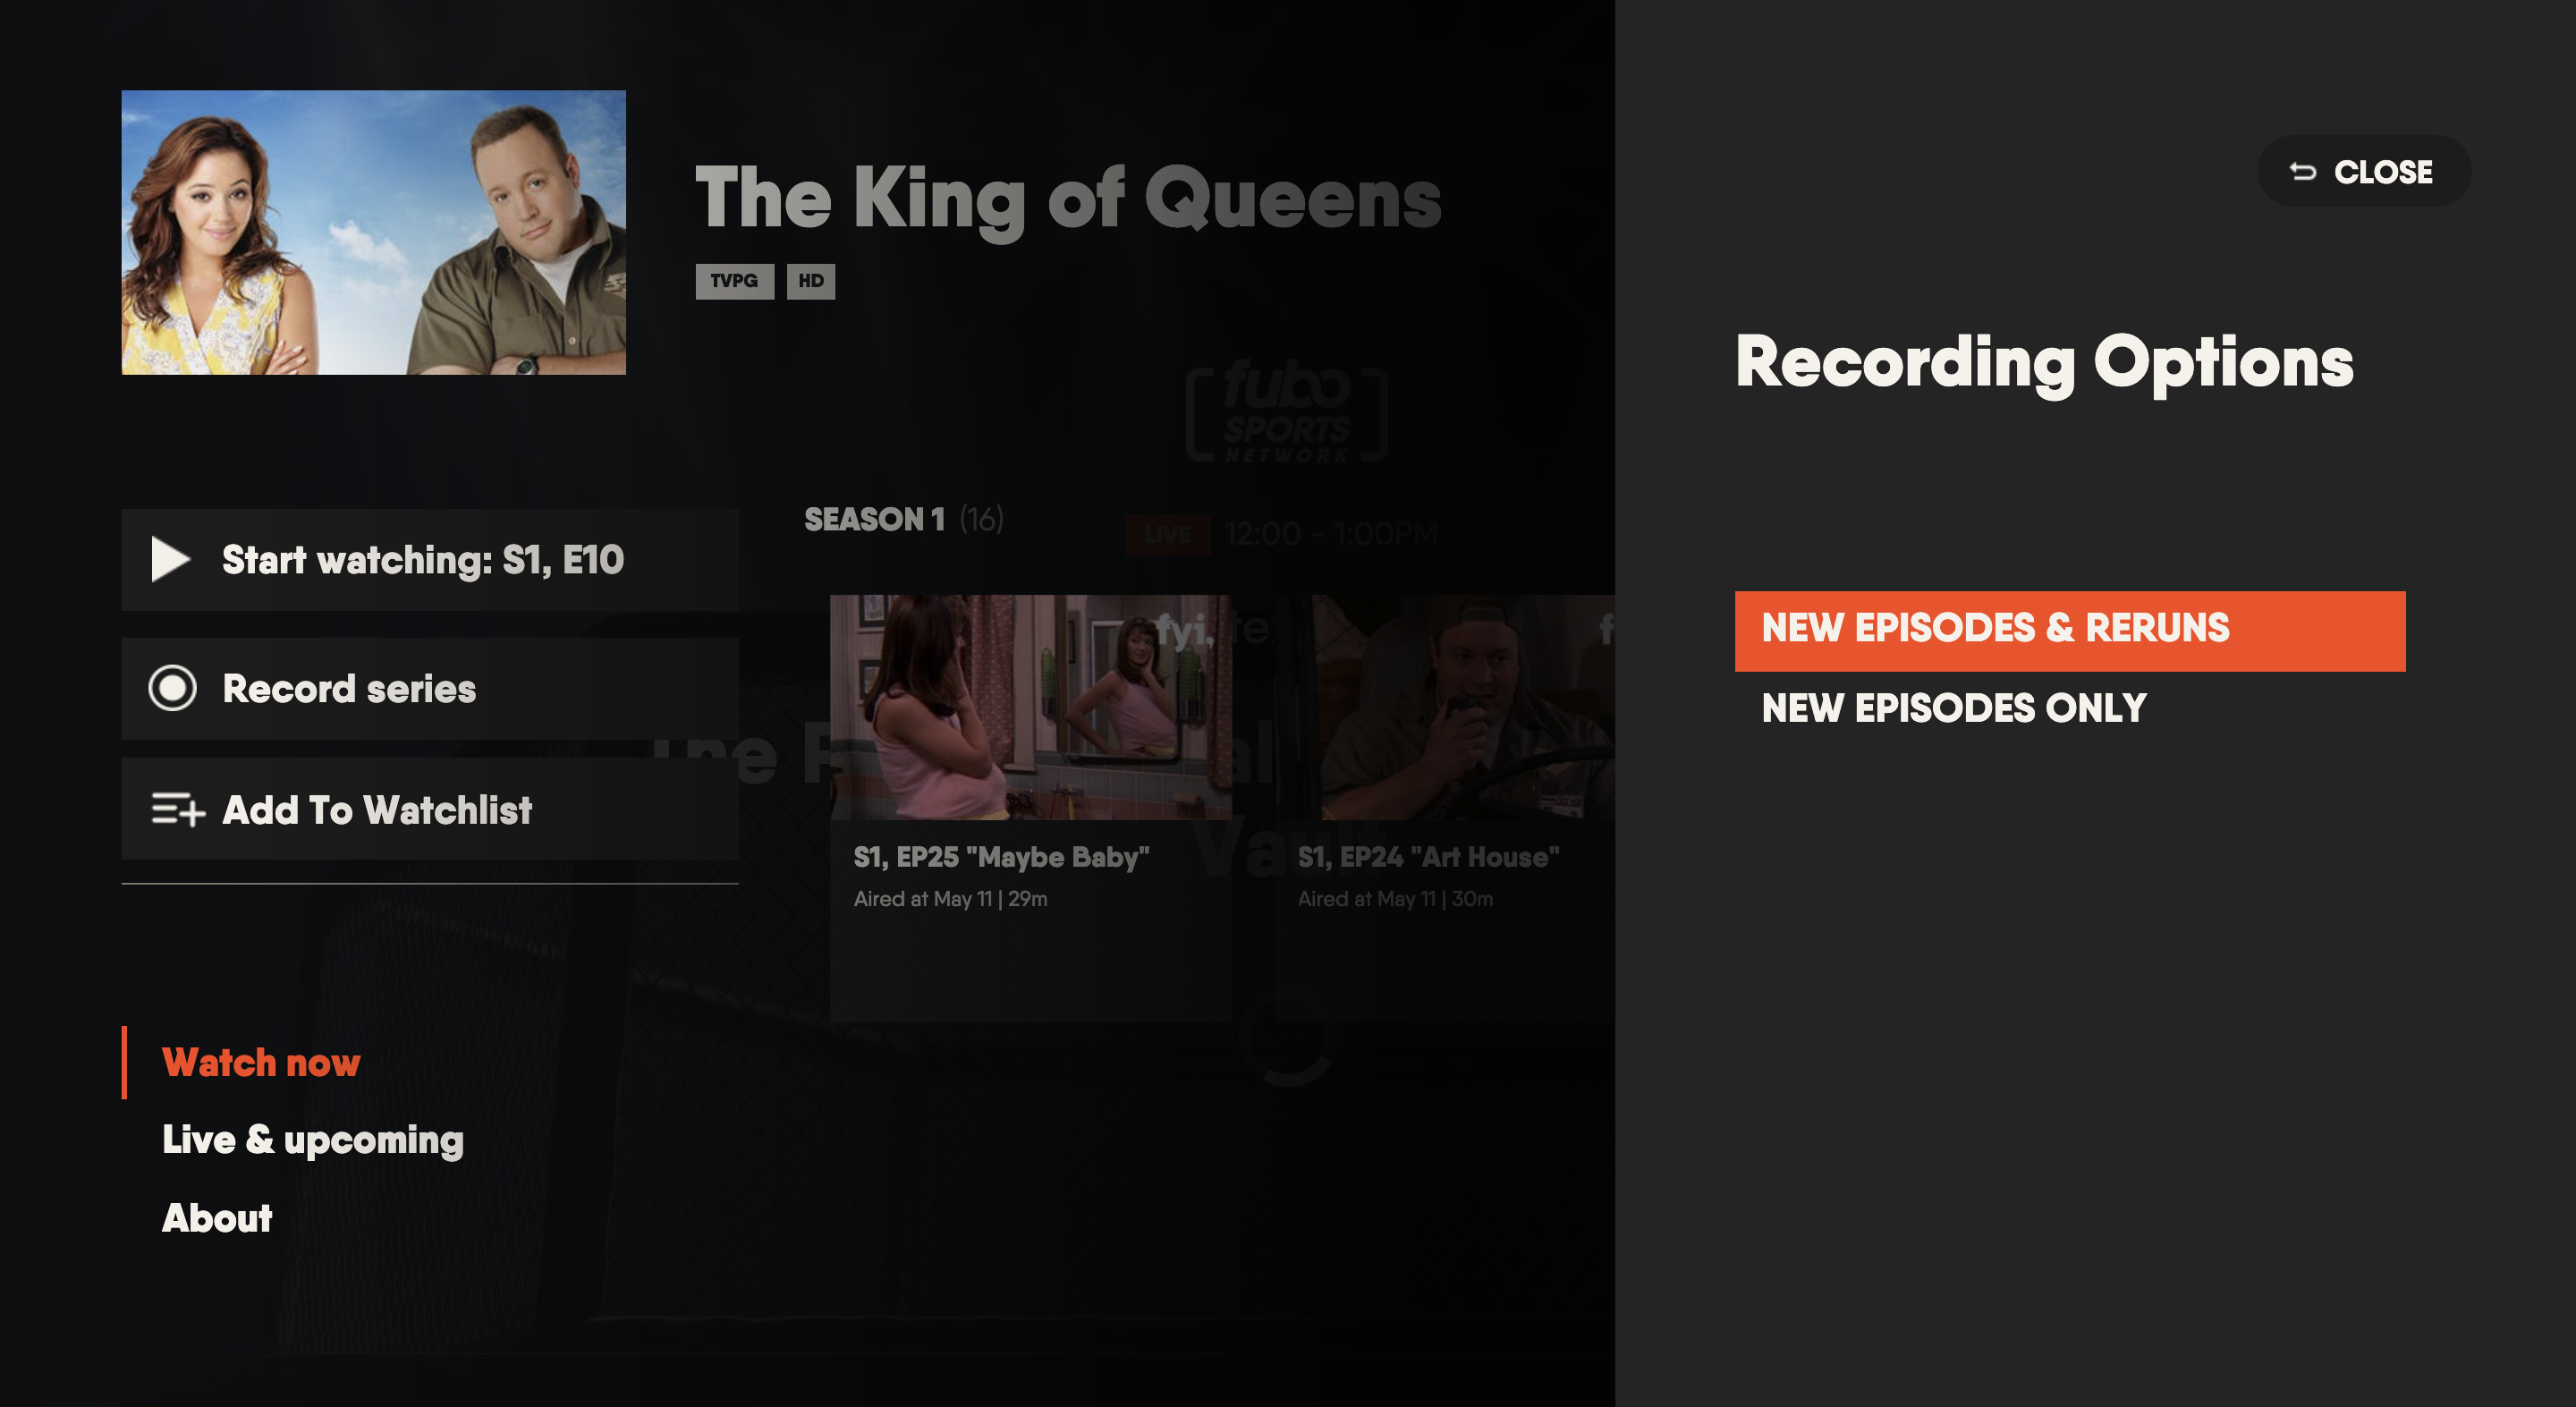 Series details page of the FuboTV app on Vizio TV with recording options shown along the right side of the screen